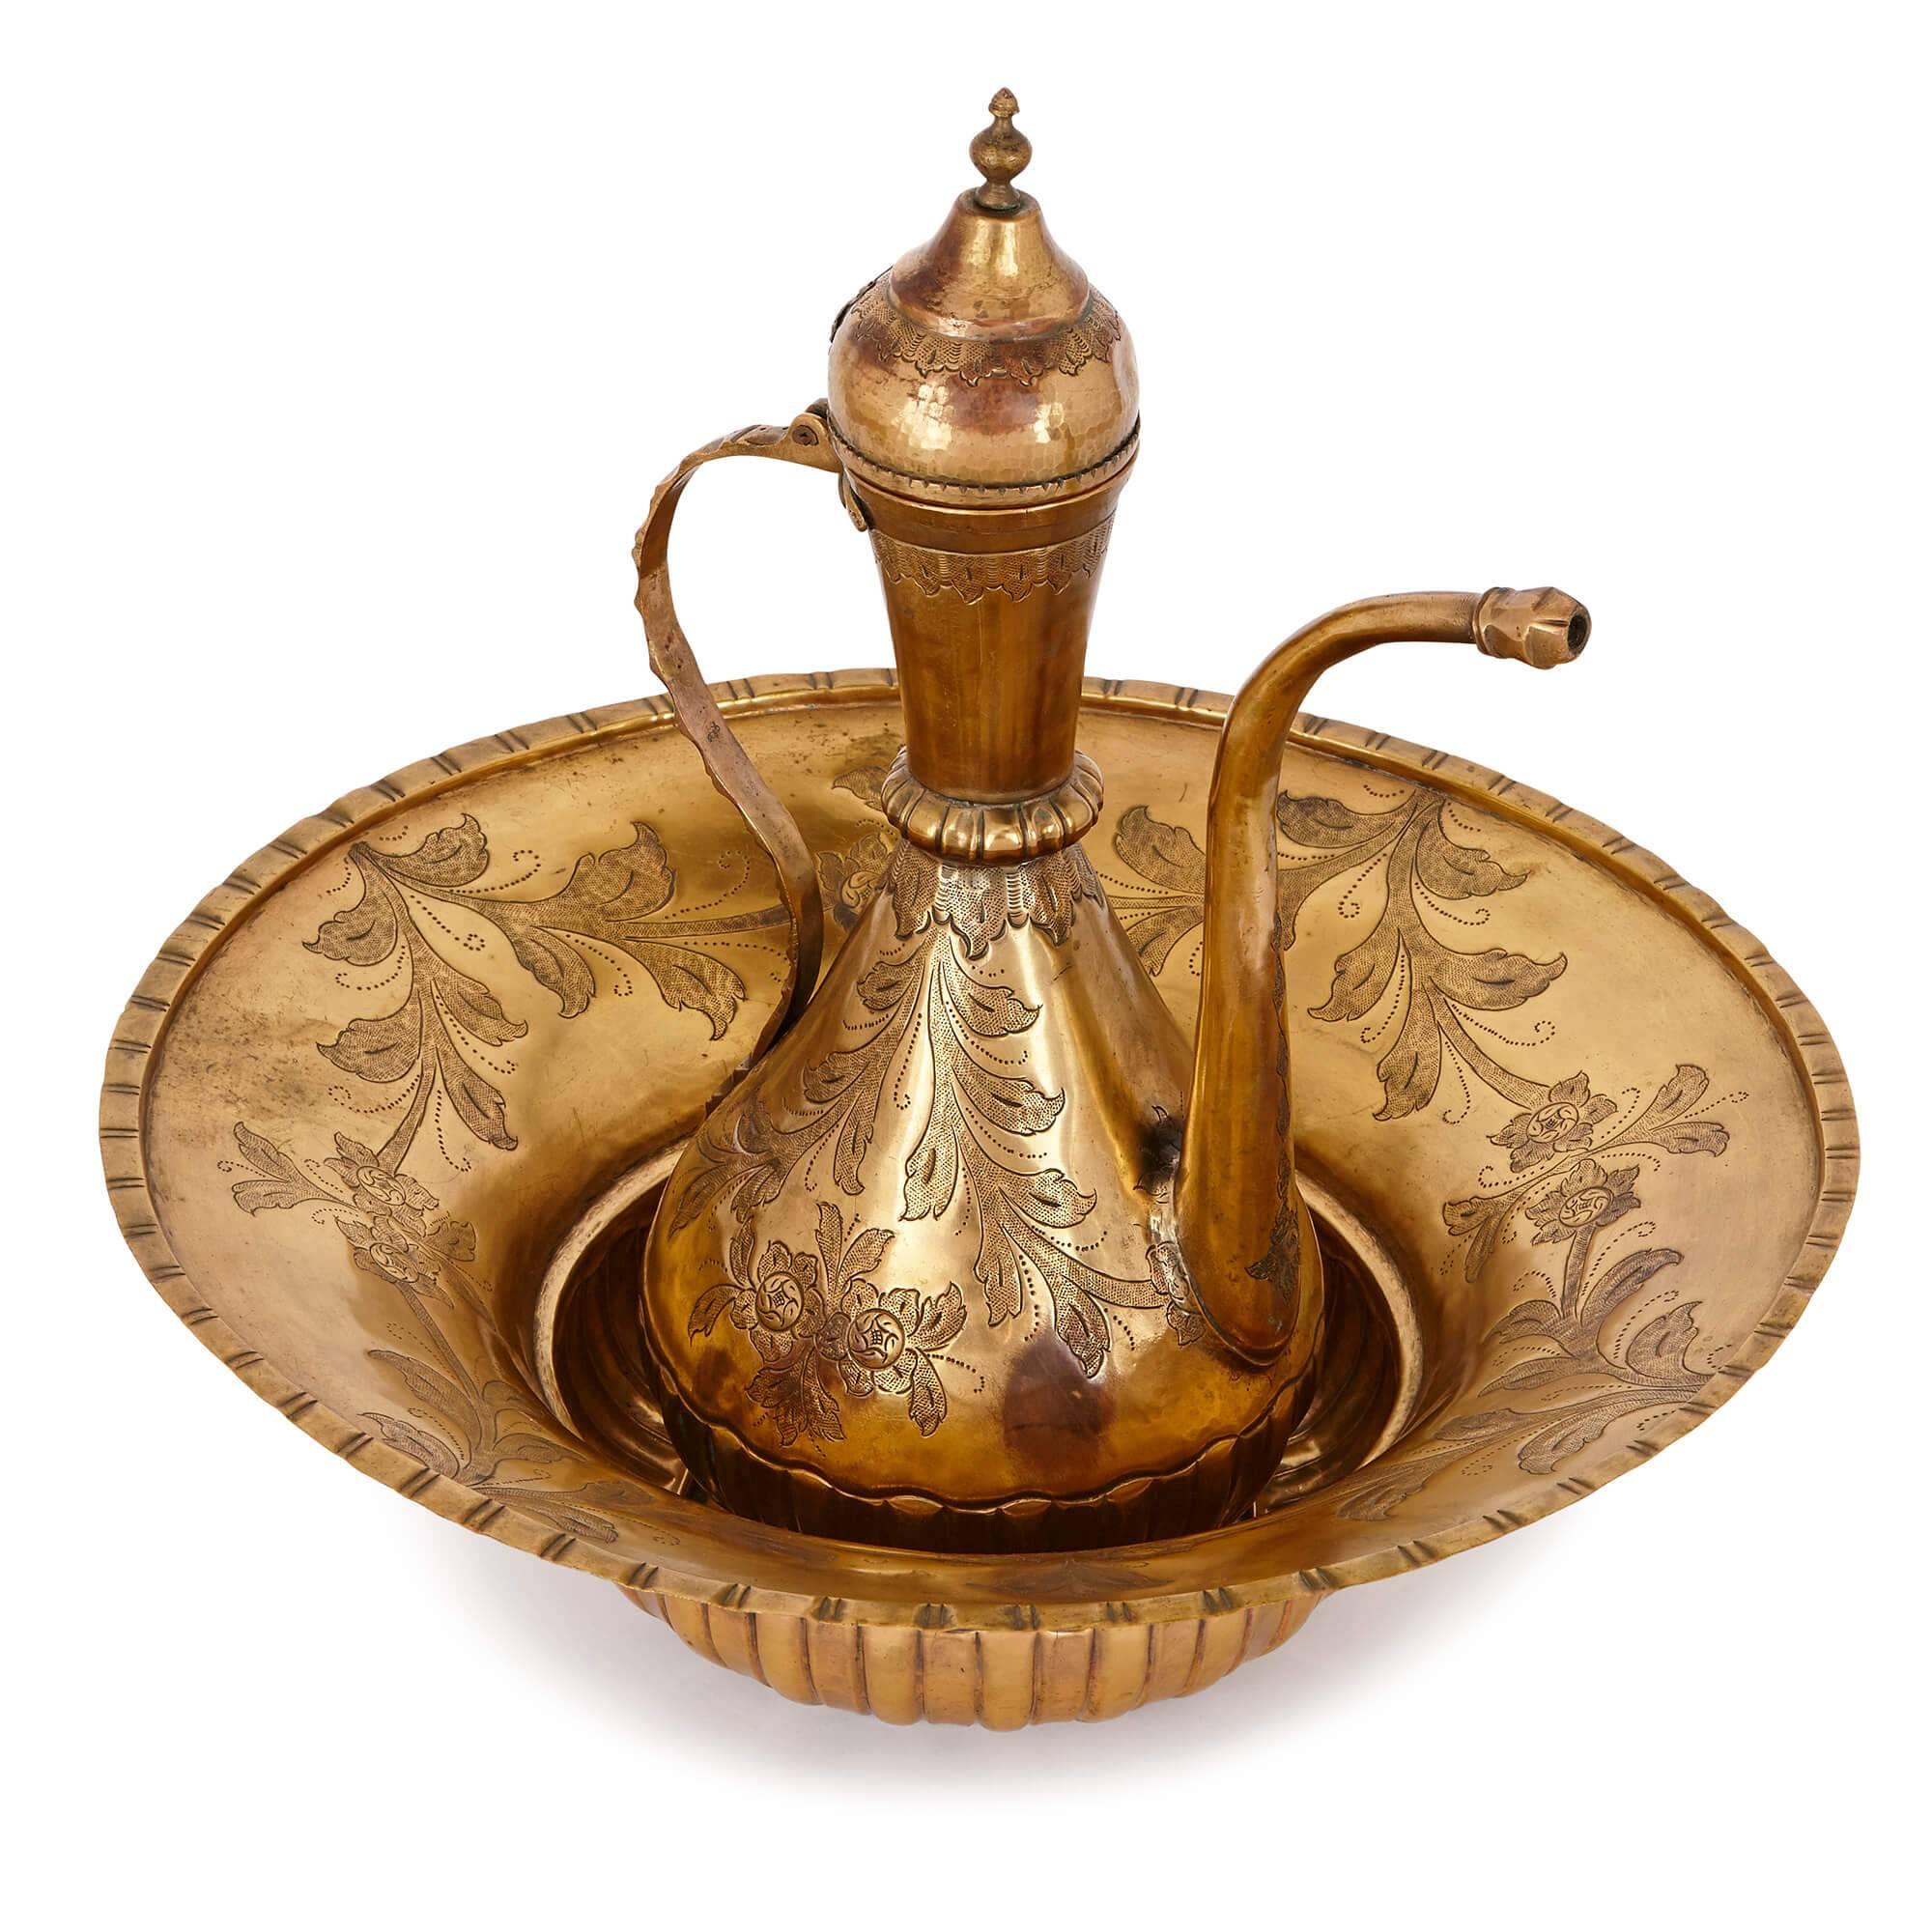 This beautiful ewer and basin set is a delightful product of the 18th century Ottoman Empire, with a striking design aesthetic. It is made from 'tombak', or gilt-copper, a material commonly used in the Ottoman Empire to make precious and ceremonial